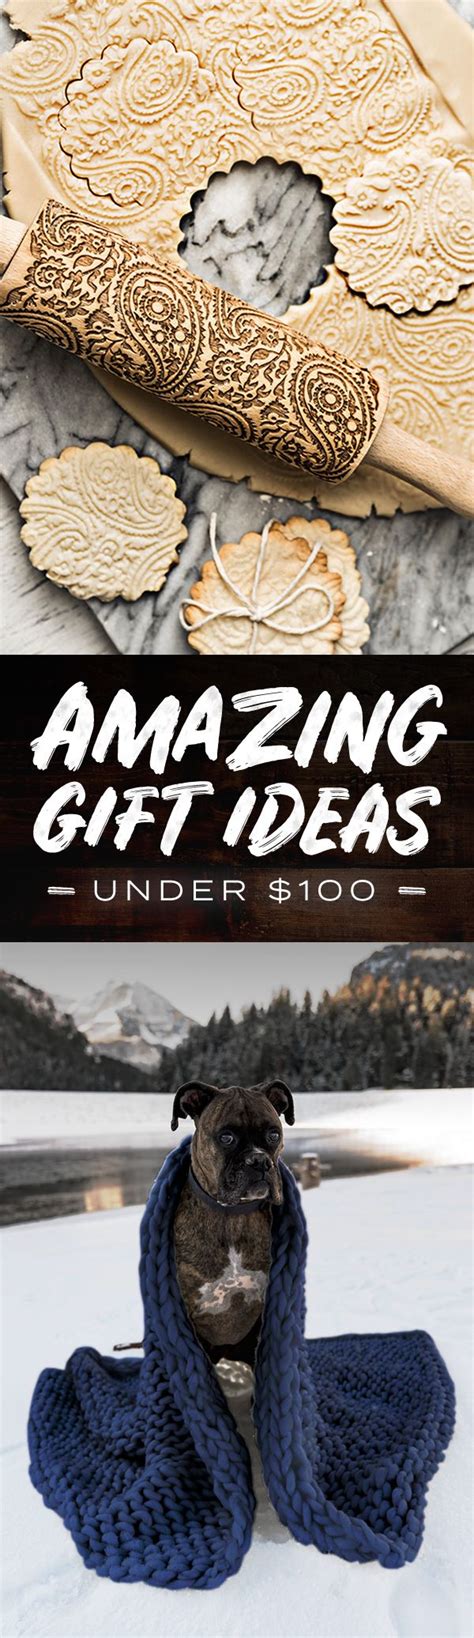 Presentation is key, and you want your gift sitting pretty under the tree. Amazing Holiday Gift Ideas under $100 - ★★★★★ (5/5) (With ...